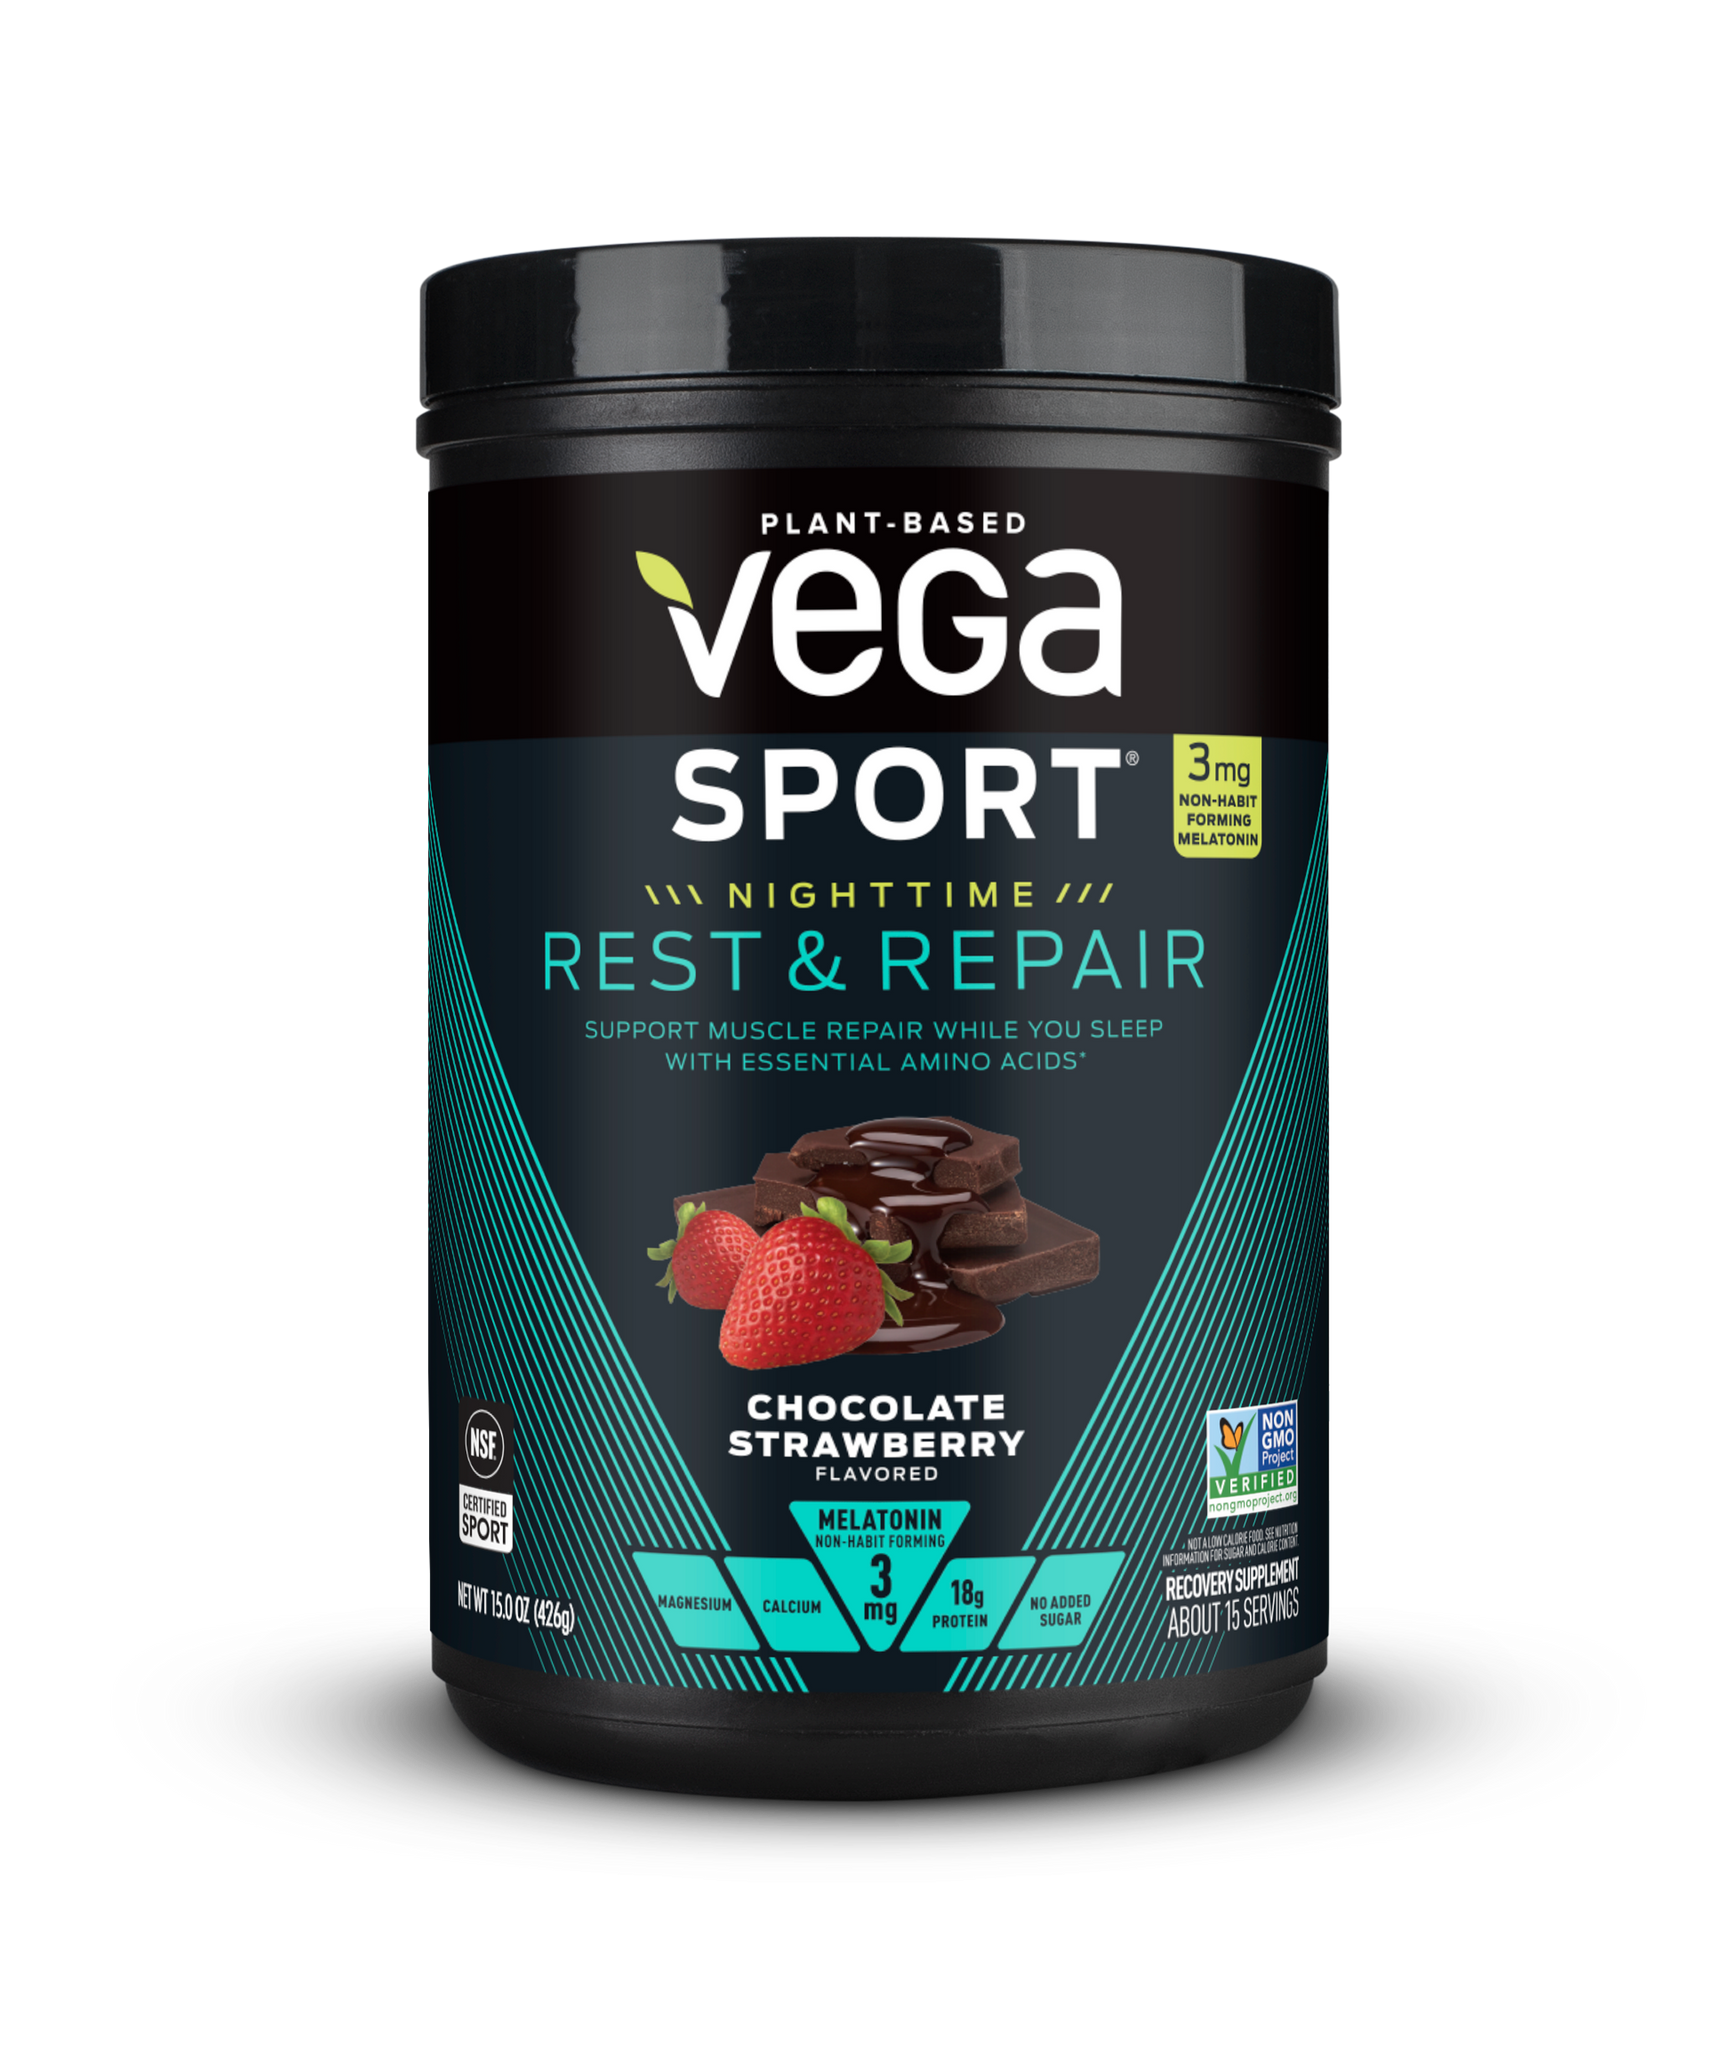 Vega Sport® Nighttime Rest & Repair - Plant-Based Recovery Protein